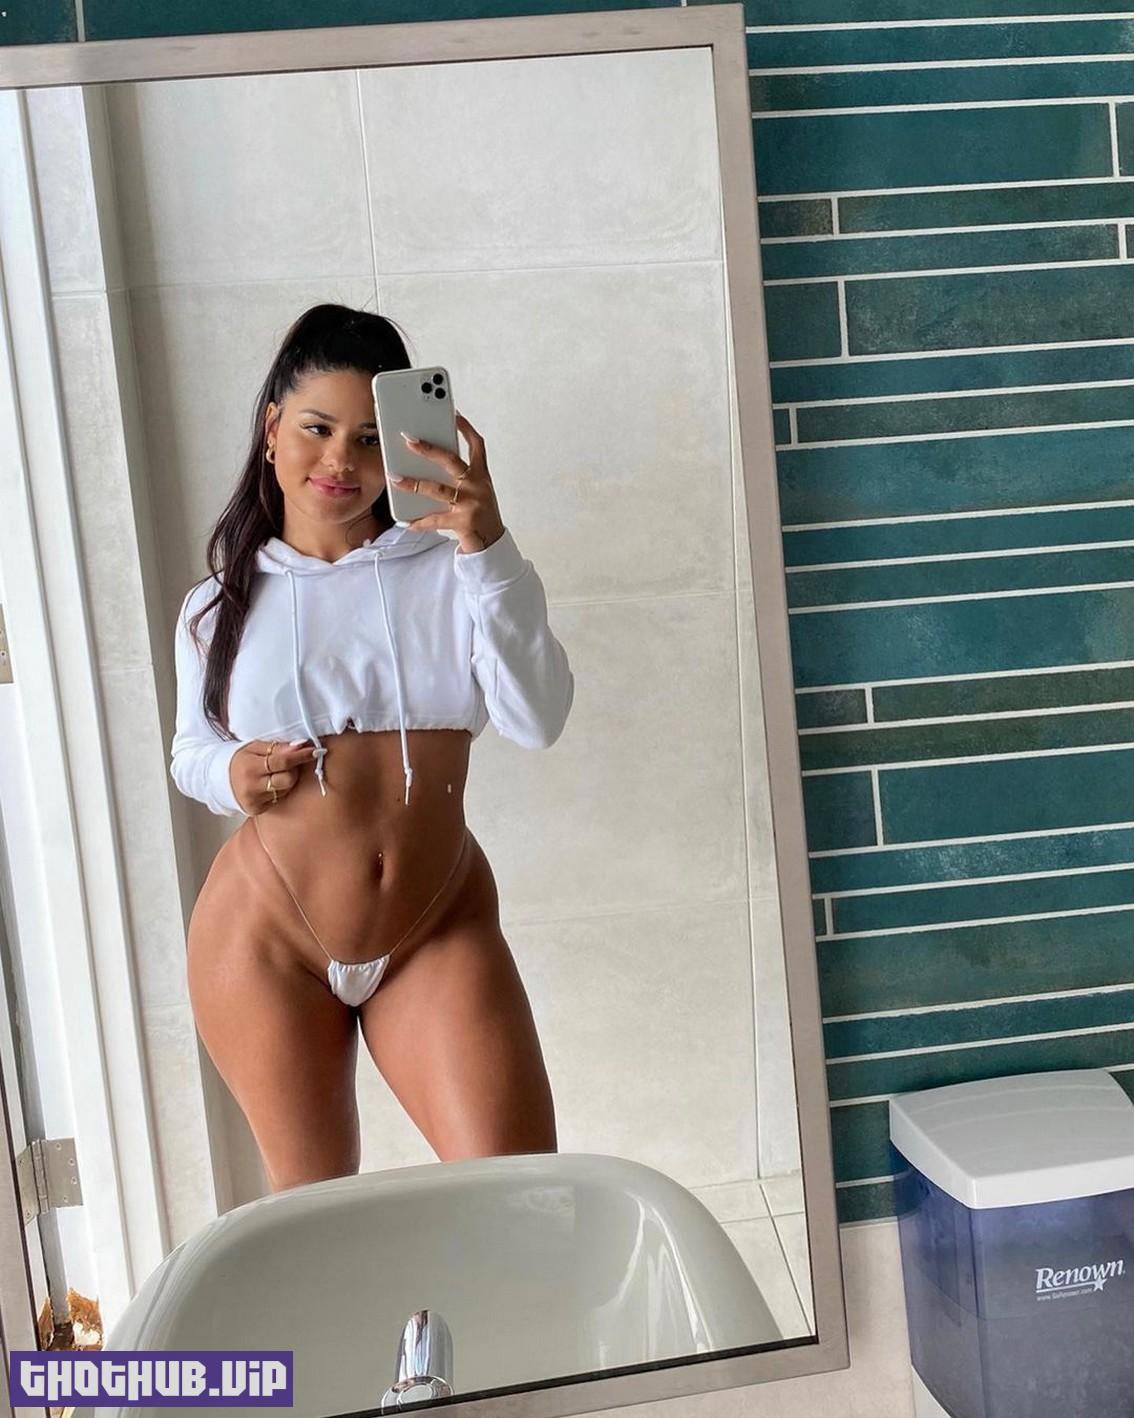 1677666162 627 Katya Elise Henry Sexy 130 Photos And Videos